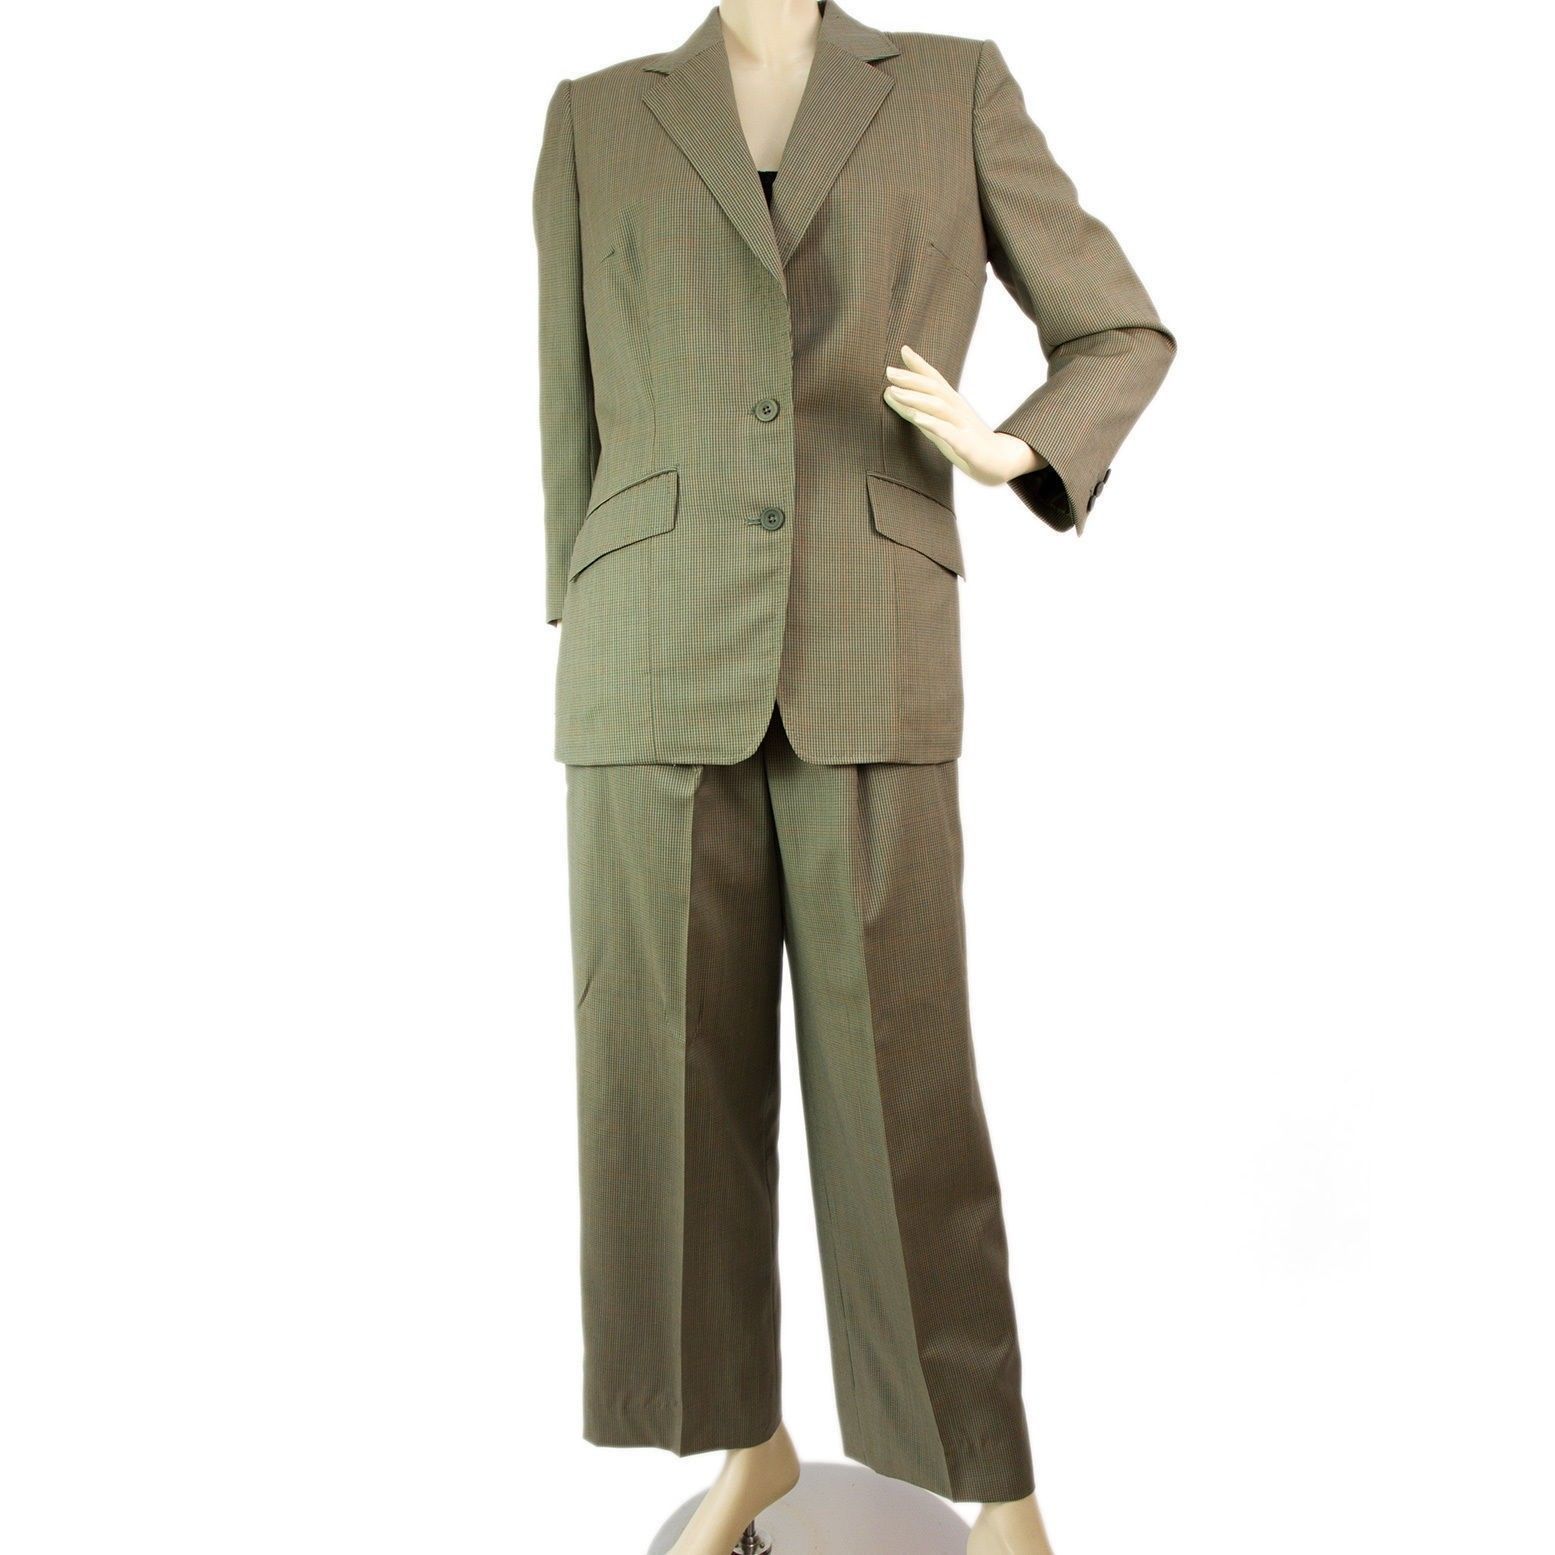 Tailor Made khaki Green Checked Jacket Blazer Pants Trousers Suit - $201.51